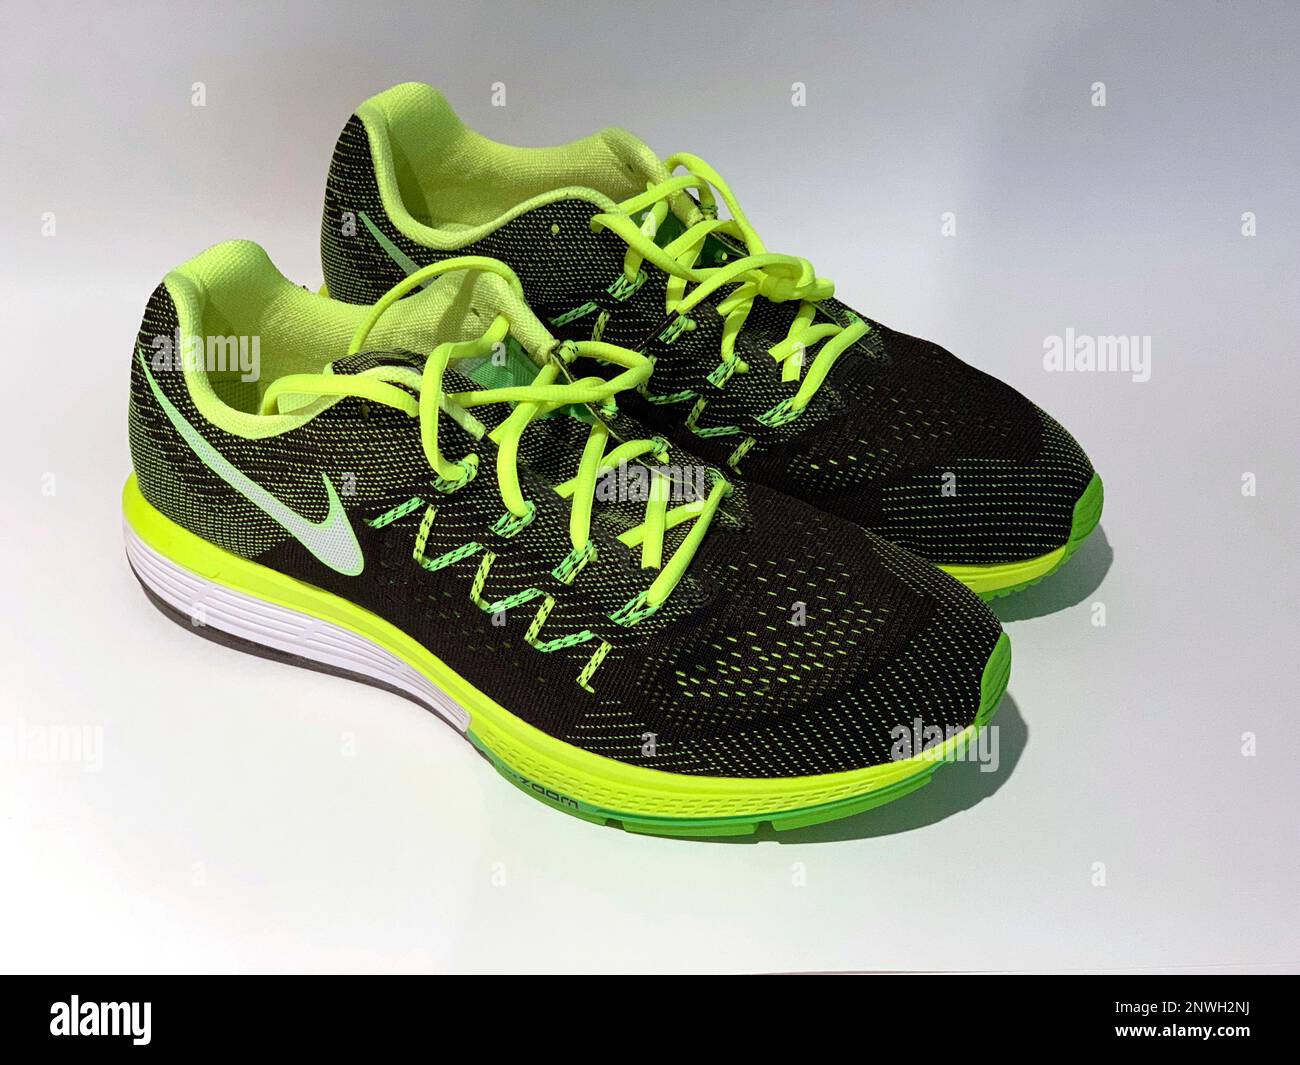 Detailed view of Nike Air Zoom Vomero 10 running shoes in volt/white, black  and electric green colorway. The shoes feature Flywire technology, mesh  fabric and Zoom Air units. (Kirby Lee via AP